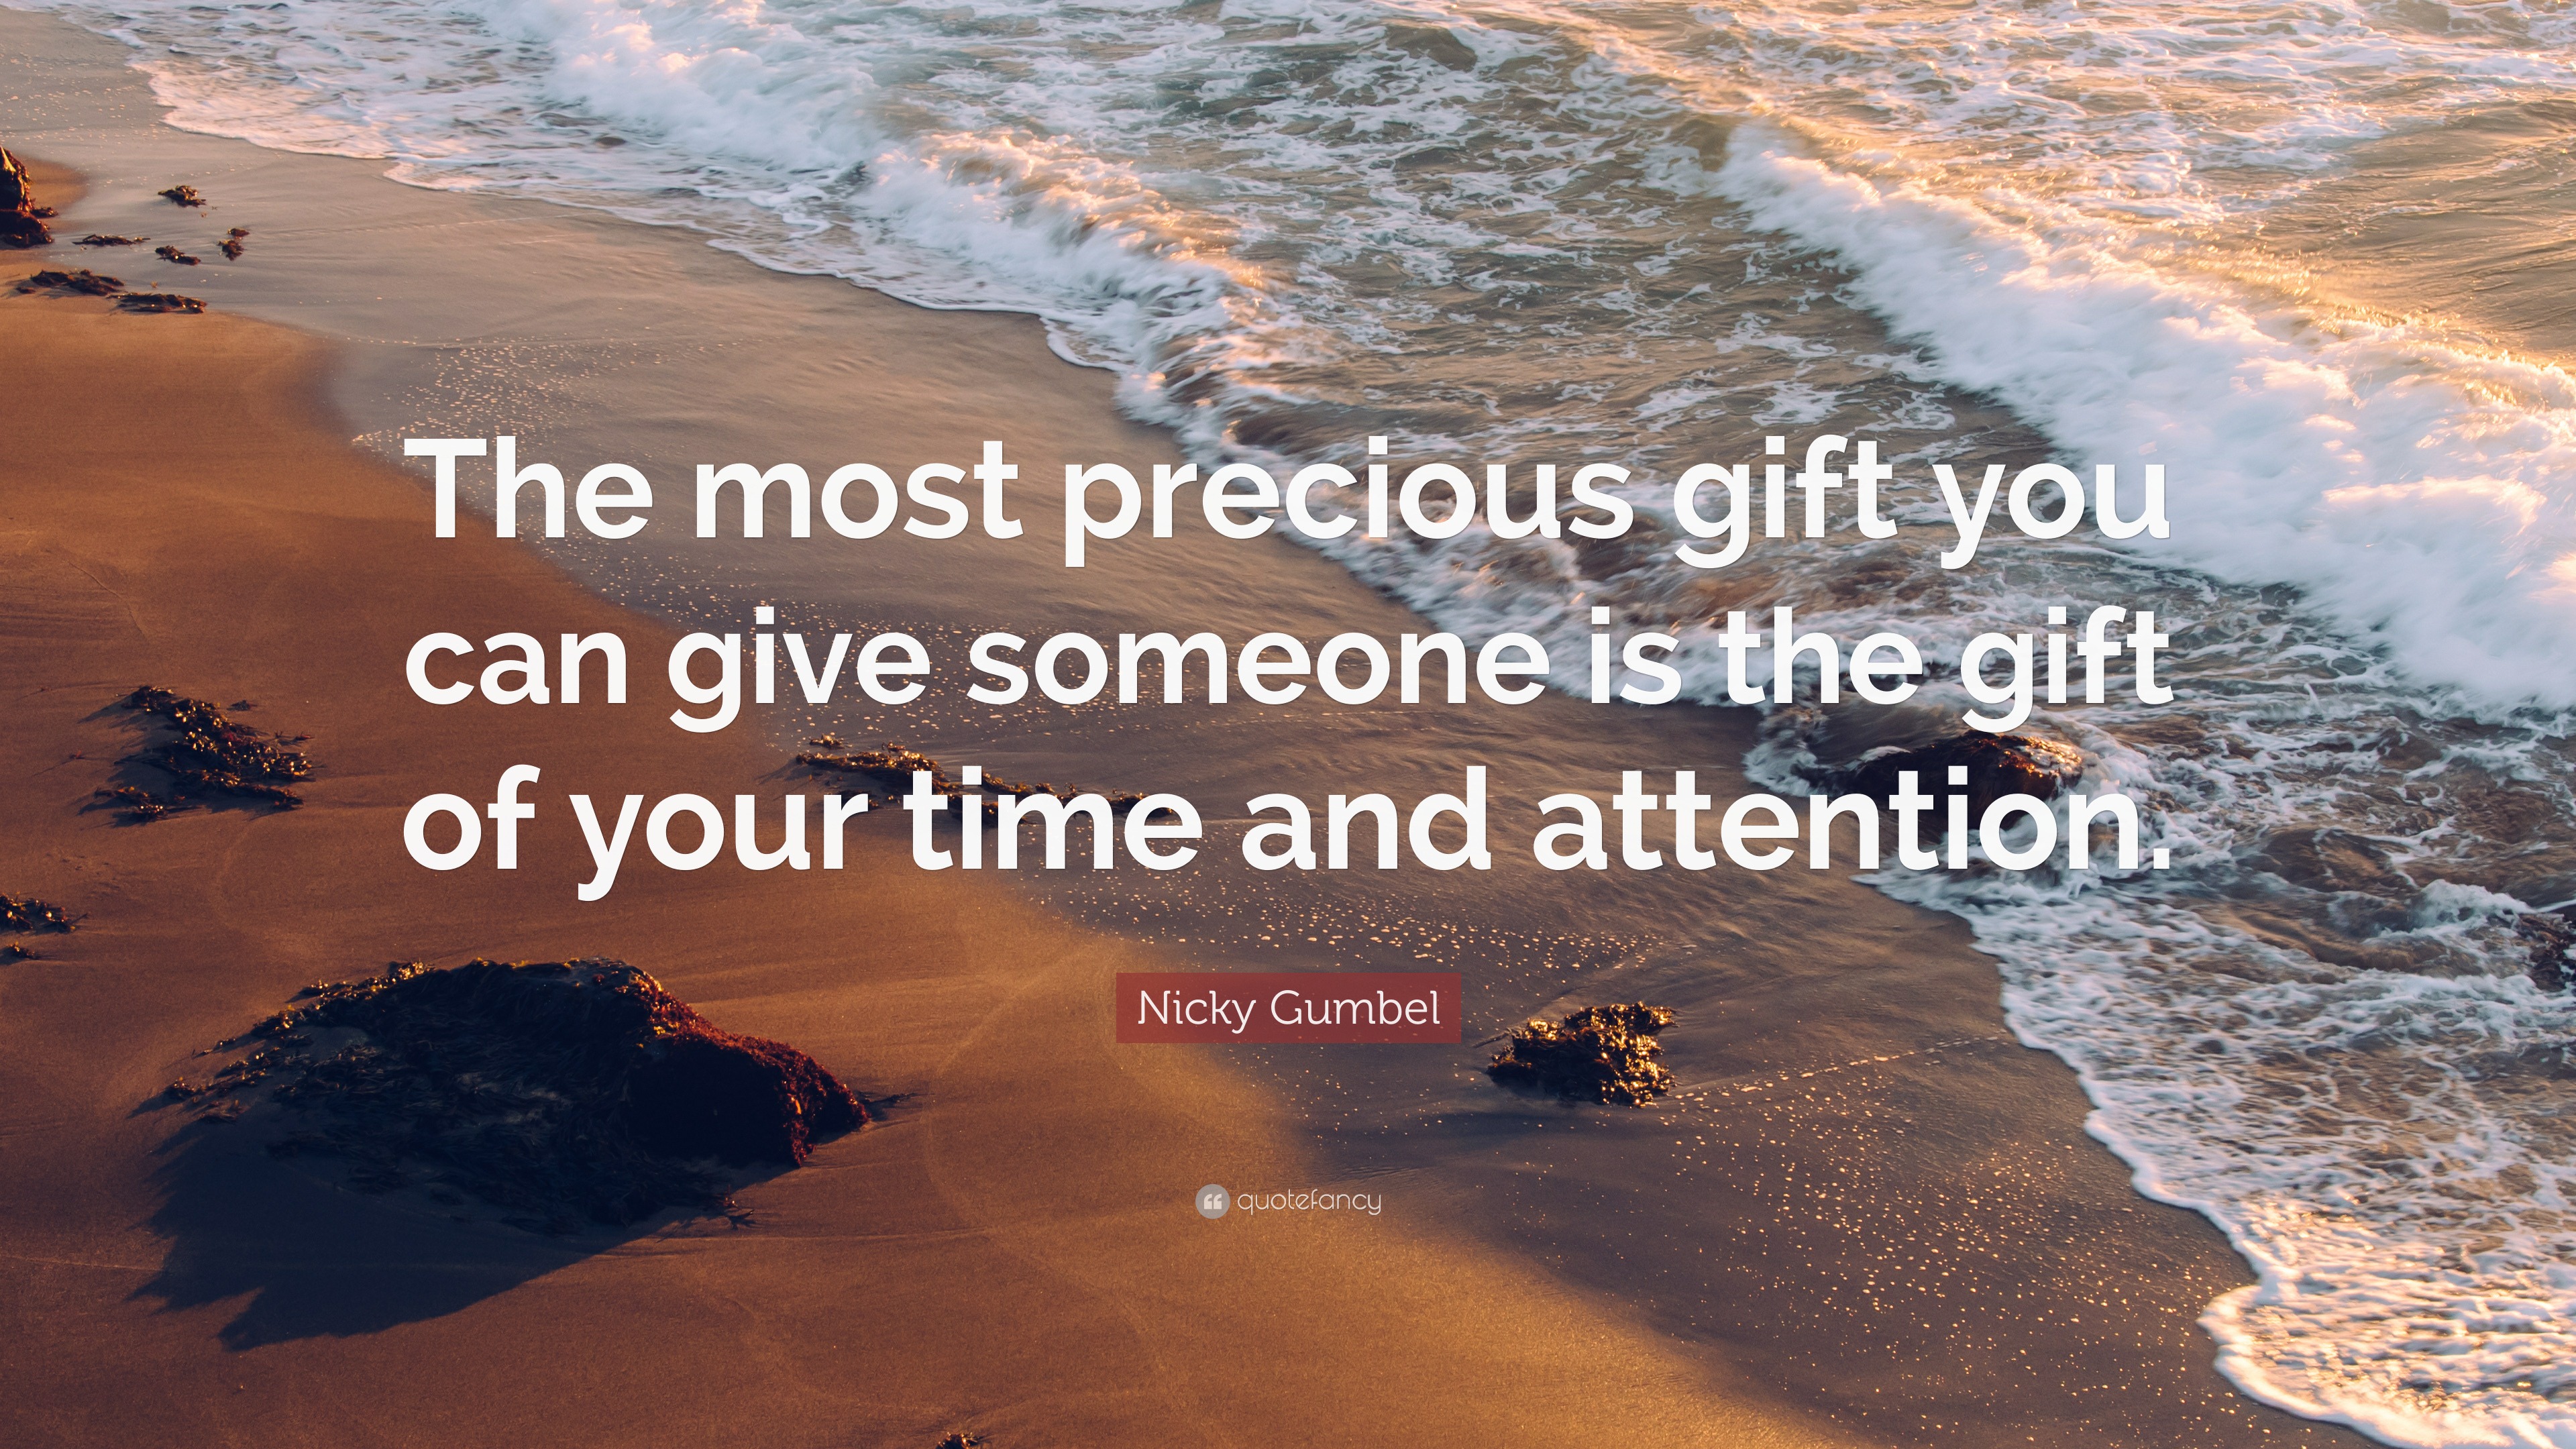 Nicky Gumbel Quote The Most Precious Gift You Can Give Someone Is The Gift Of Your Time And Attention 7 Wallpapers Quotefancy